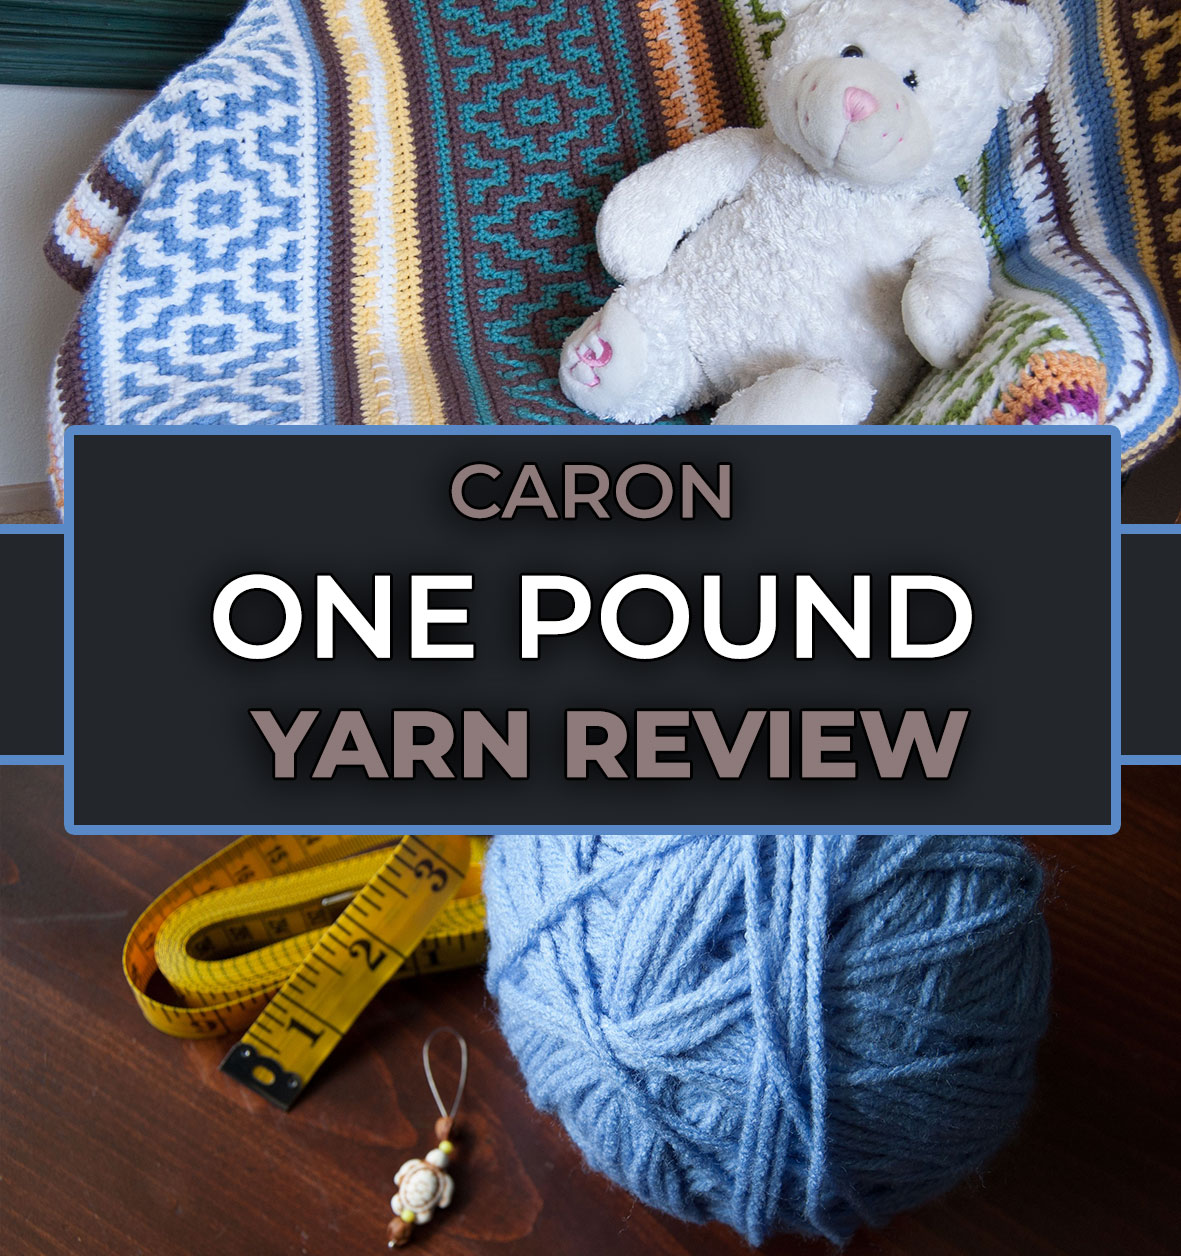 Caron One Pound Review - My Official Conclusion - Budget Yarn Reviews